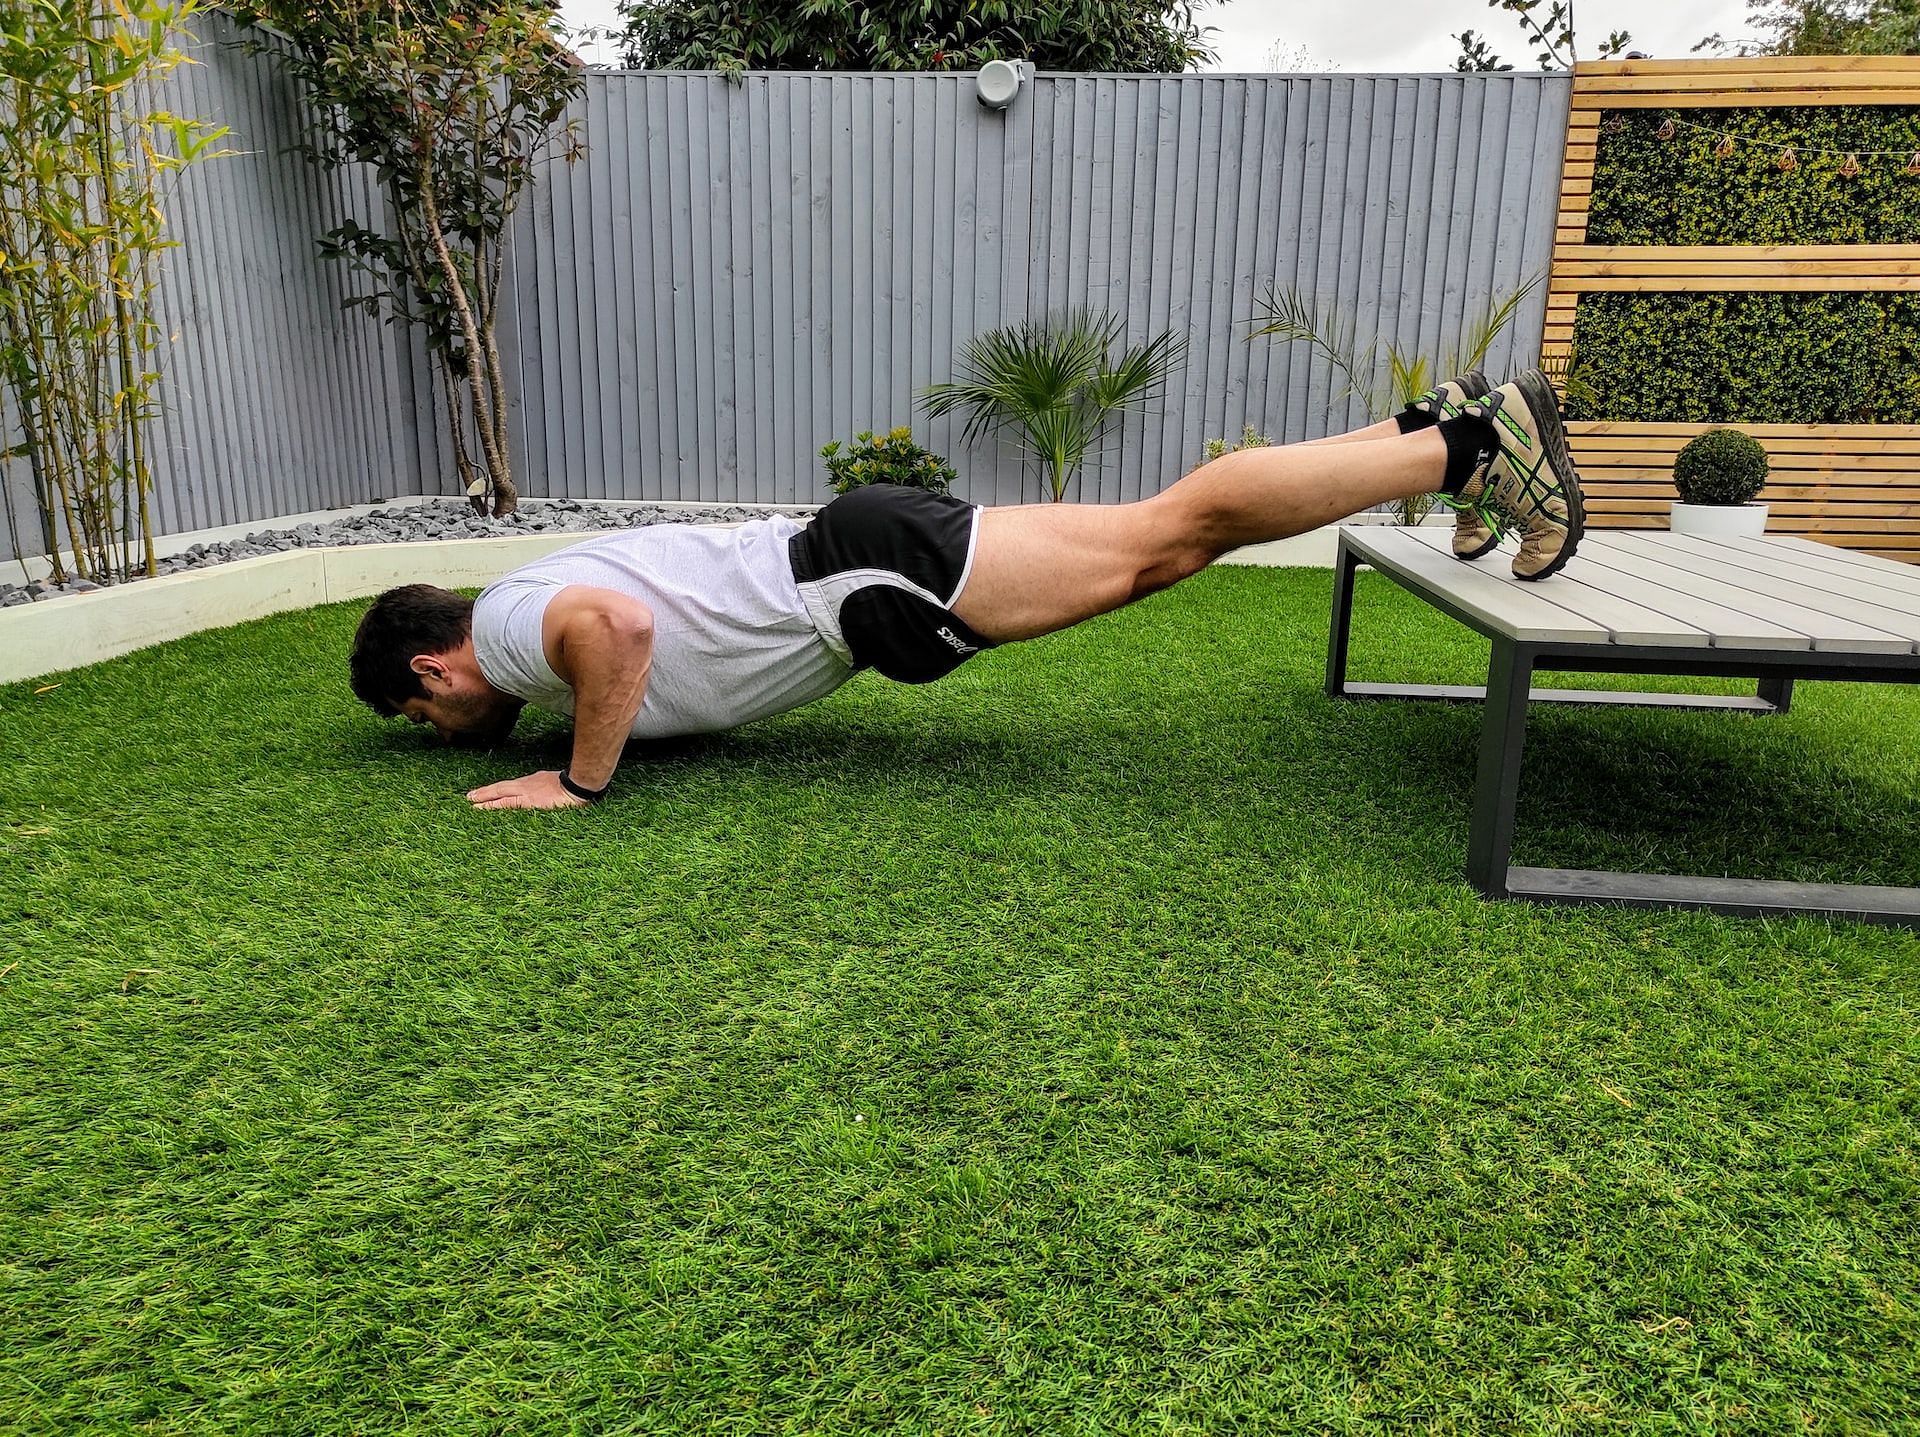 Feet elevated press-up is a great chest-building exercise. (Photo via Unsplash/MIL-TECH PHARMA LTD)